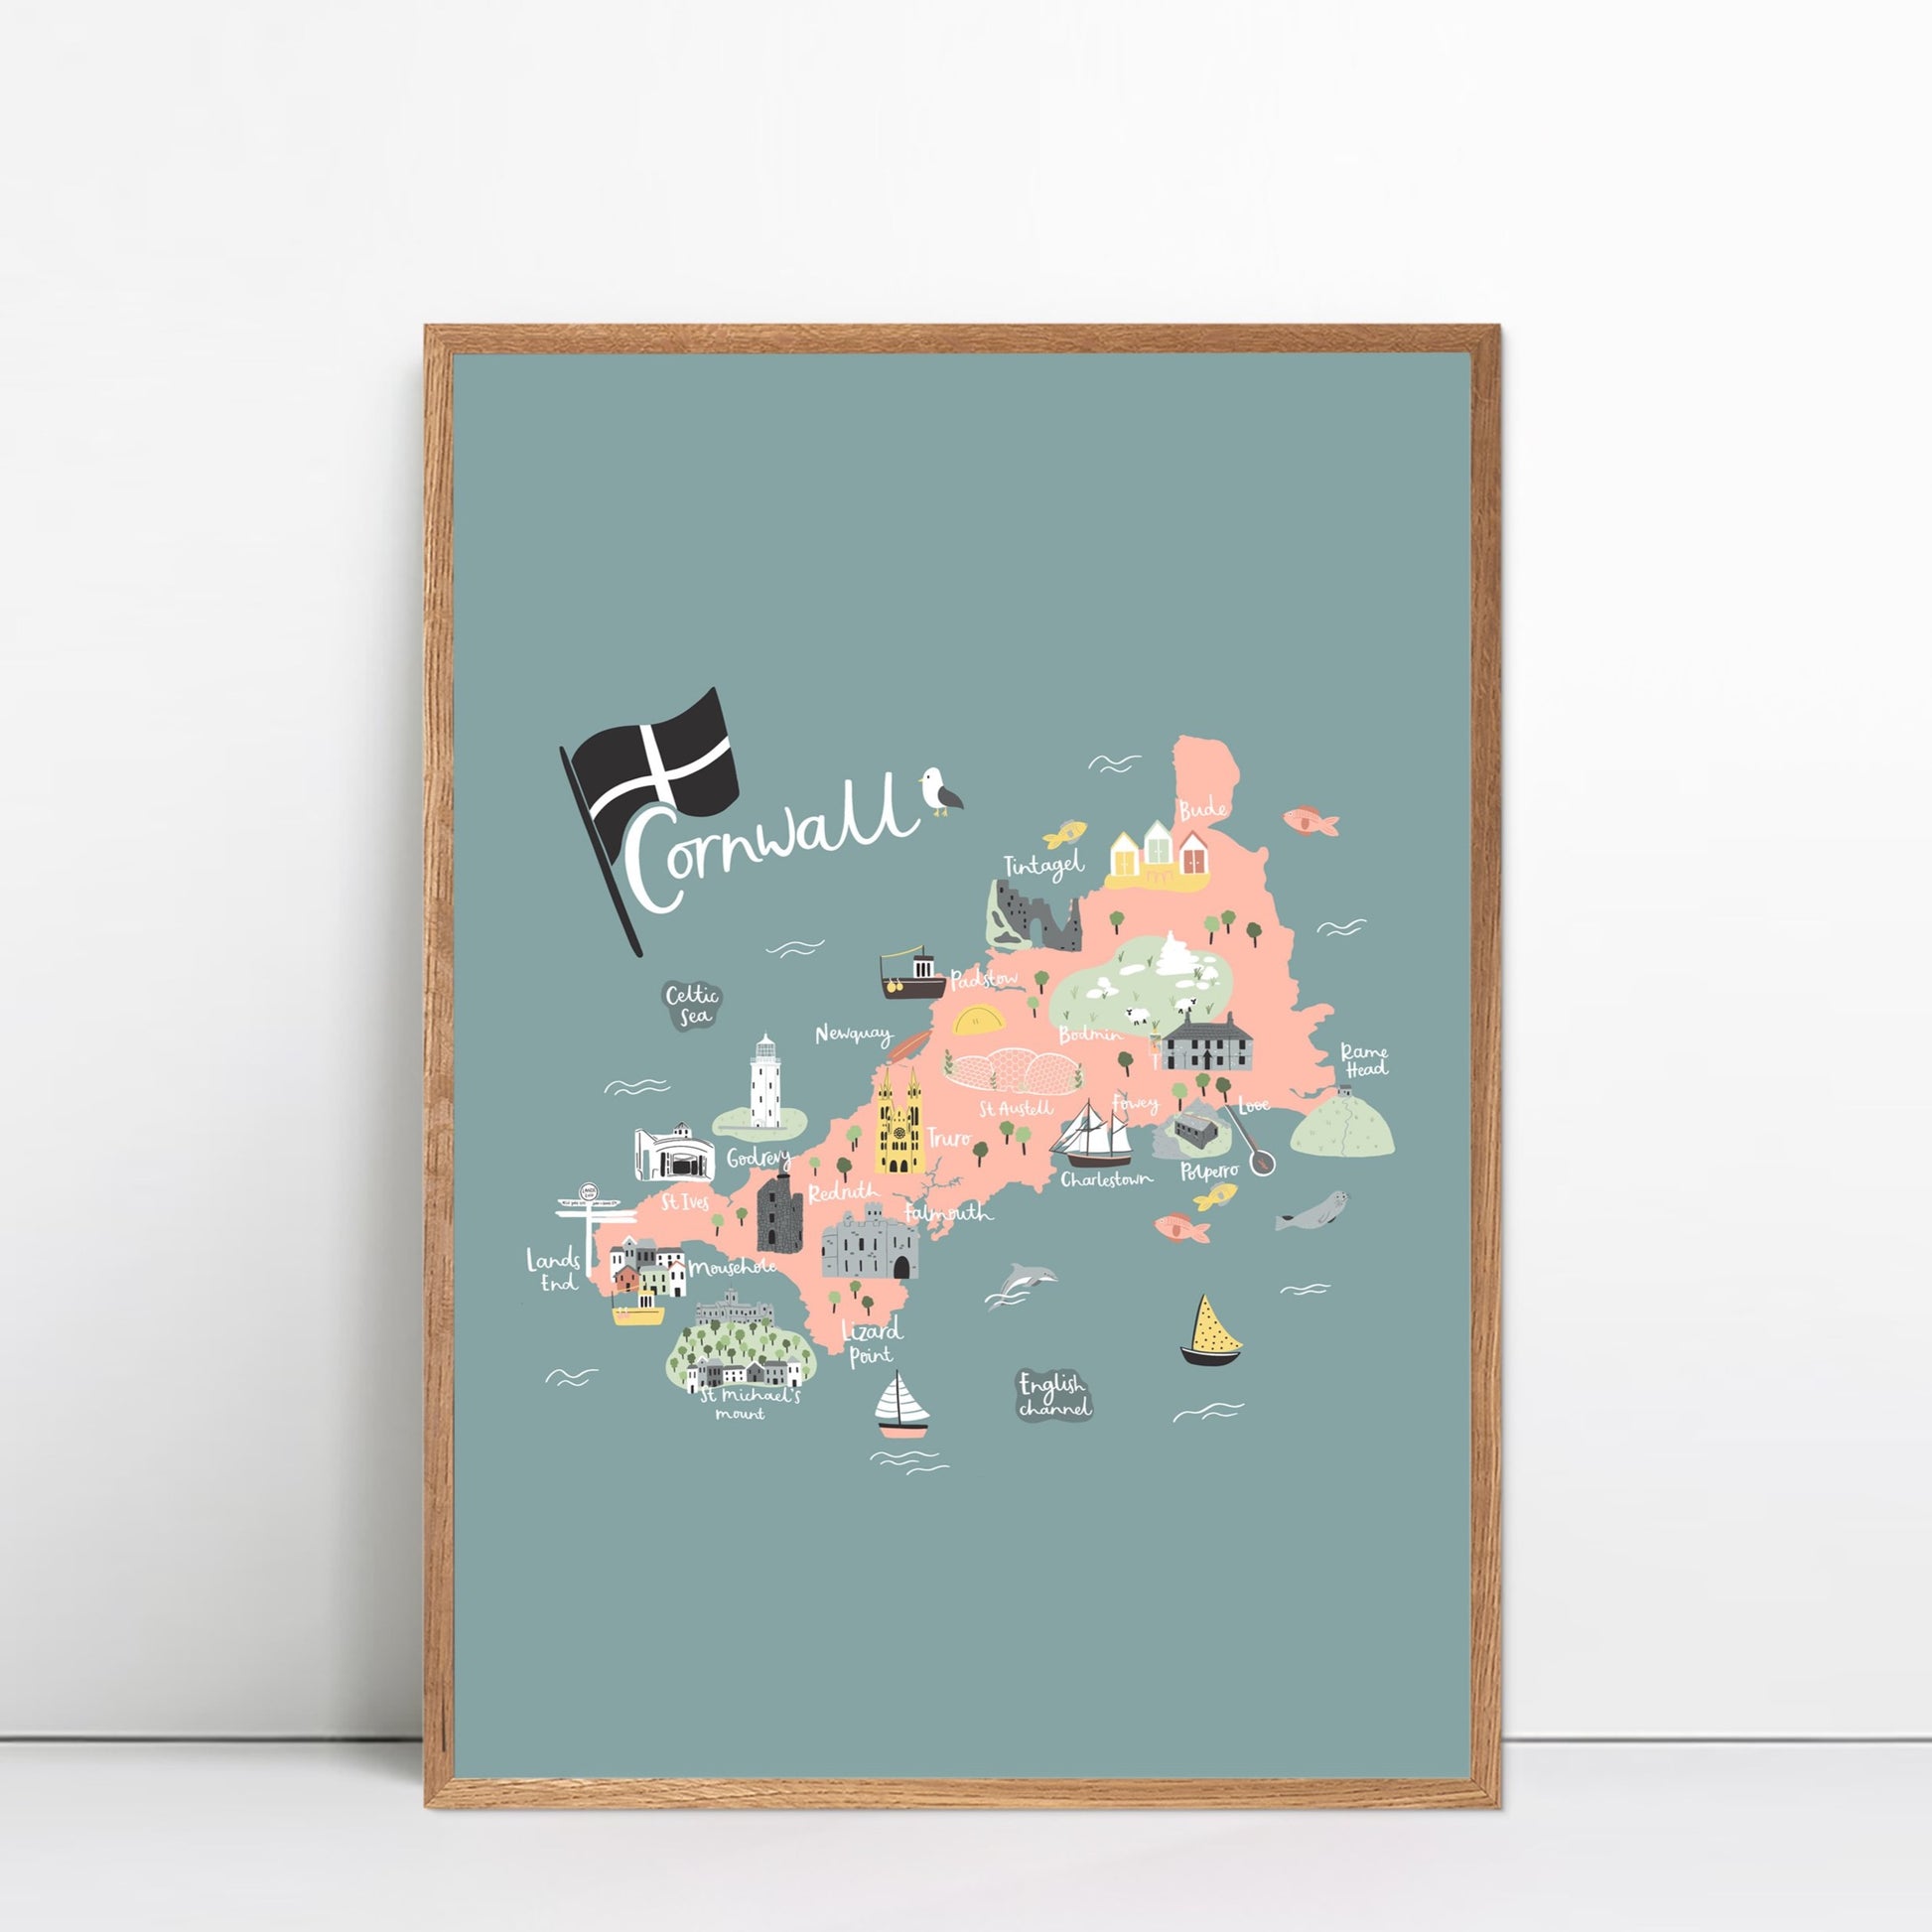 Illustrated Cornwall Map Print by Abbie Imagine. Featuring Looe, Mousehole and St Ives